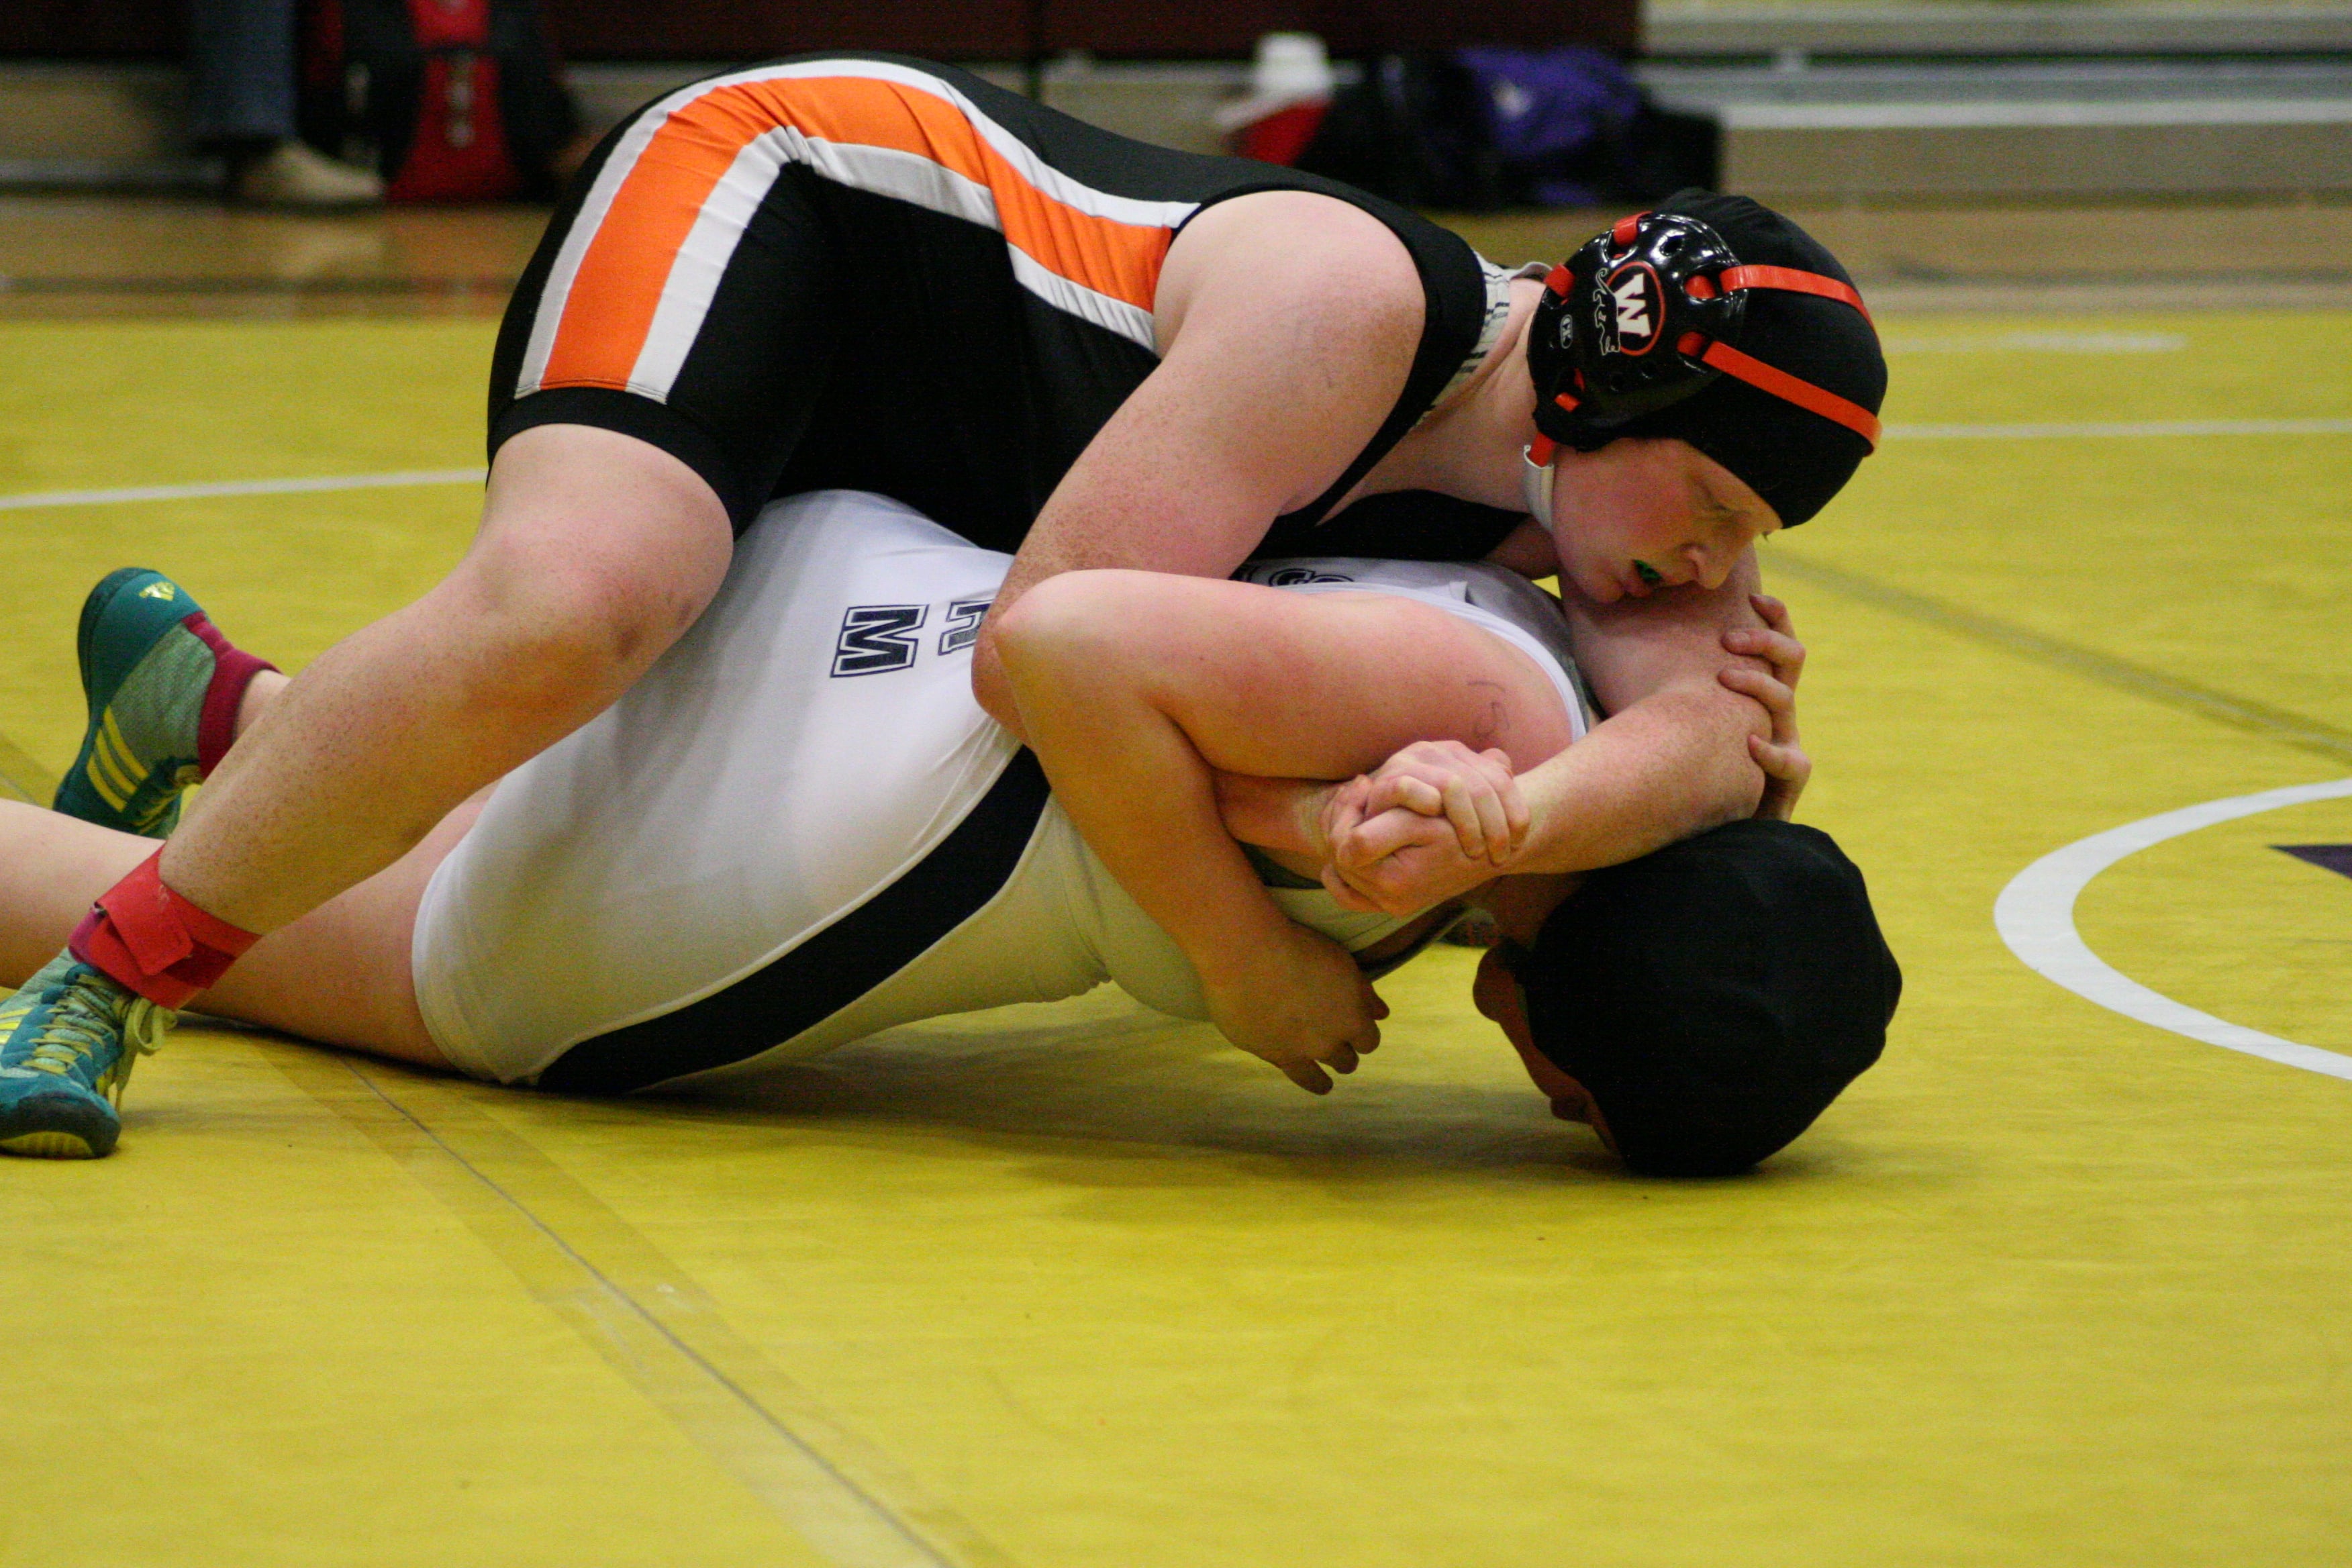 Washougal sophomore Abby Lees grounds her opponent from Skyview in the 155-pound Clark County championship match.